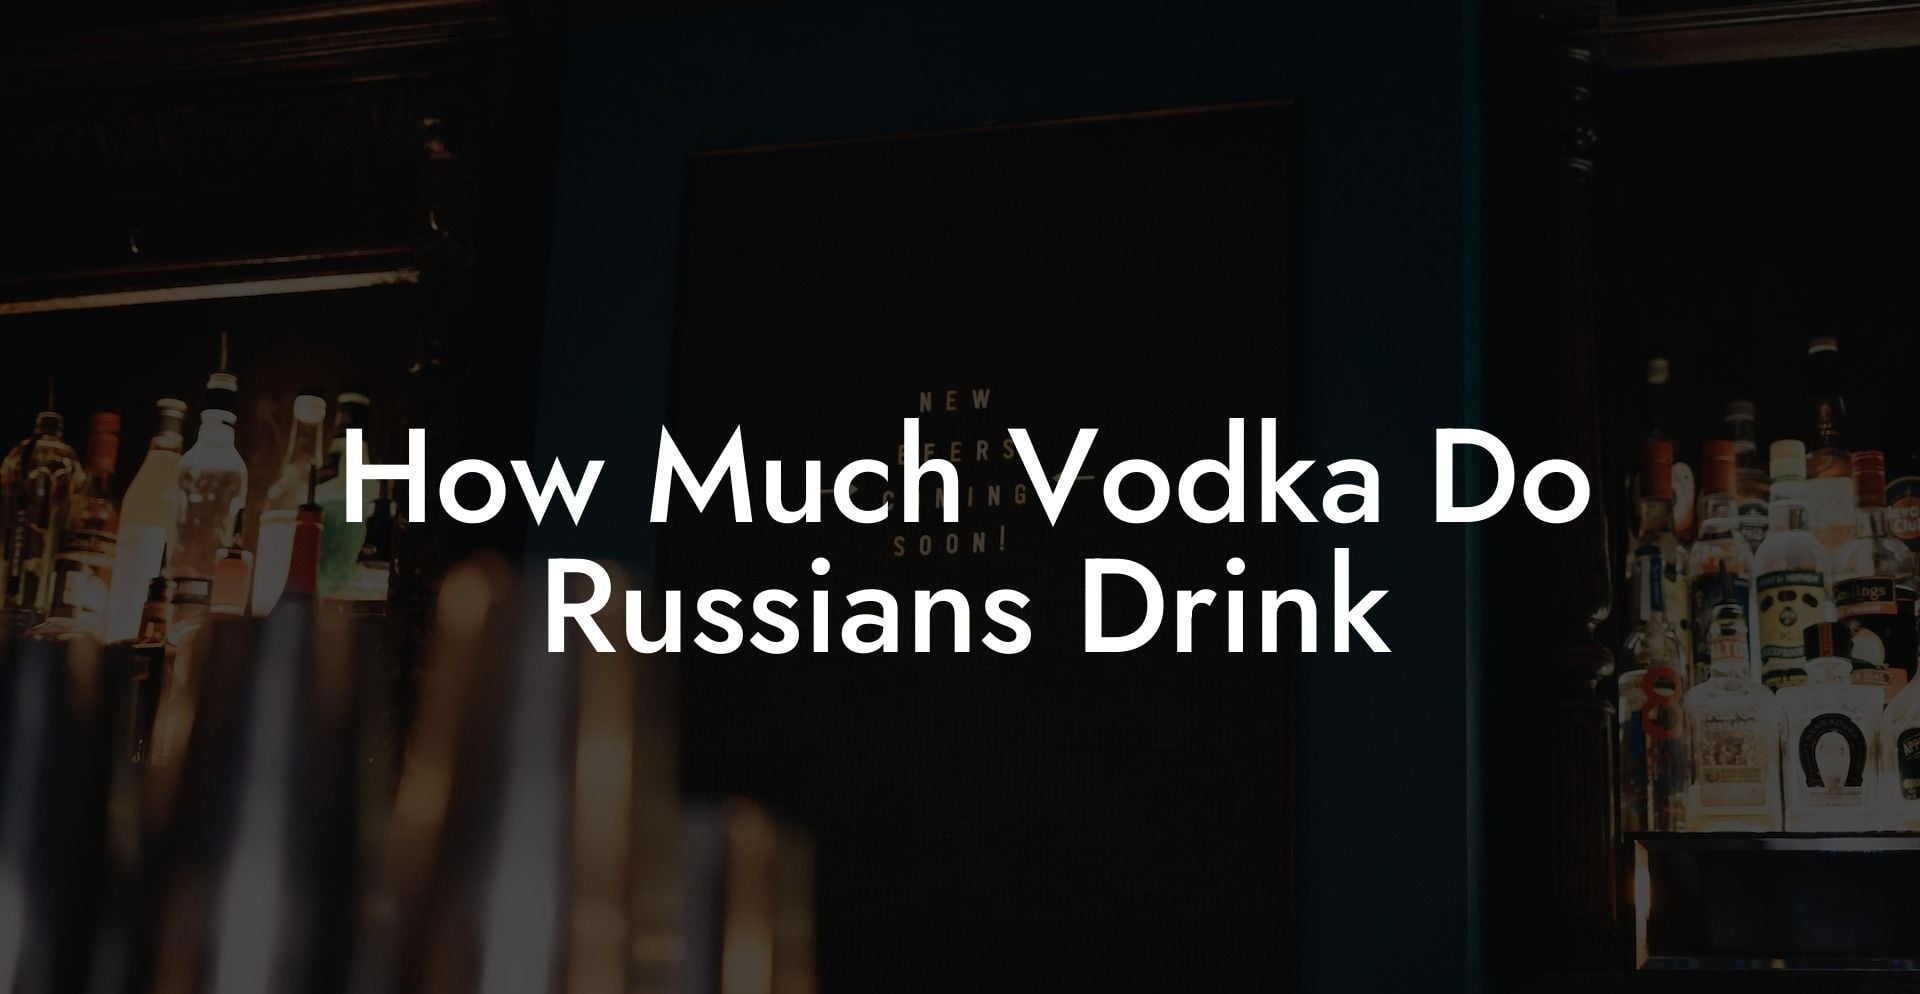 How Much Vodka Do Russians Drink